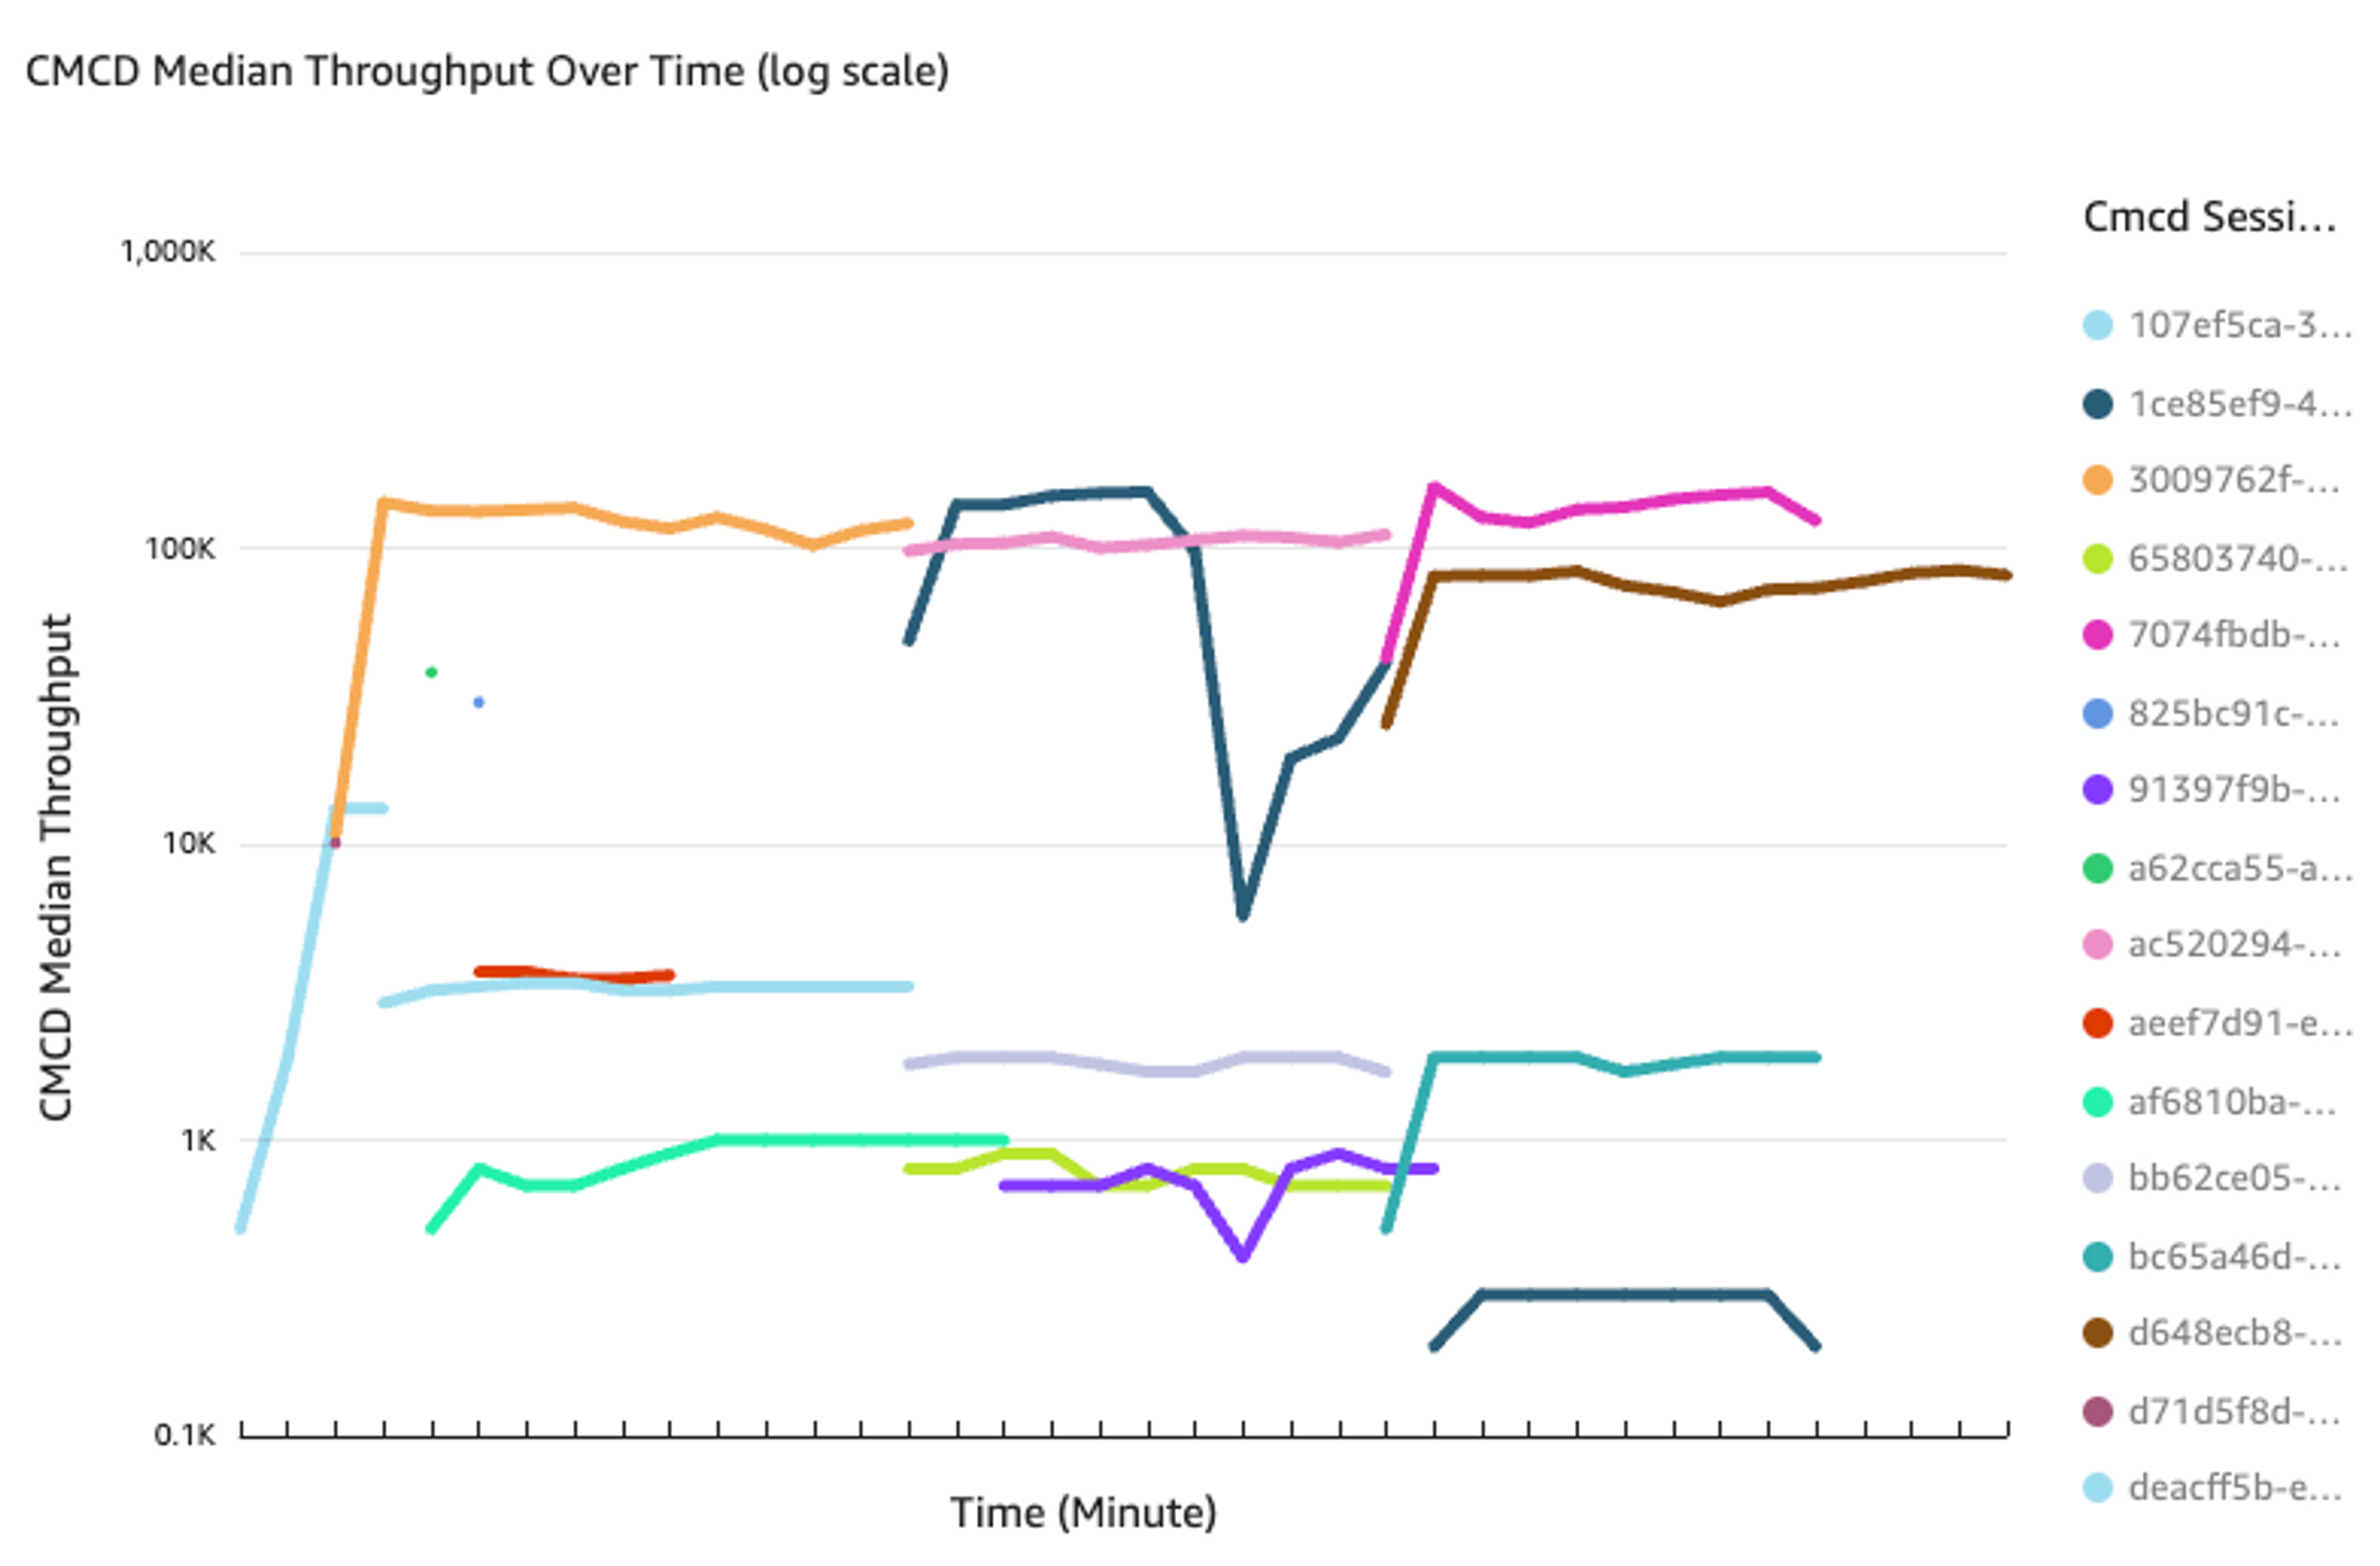 An image of CMCD Median Throughput Over Time (log scale)